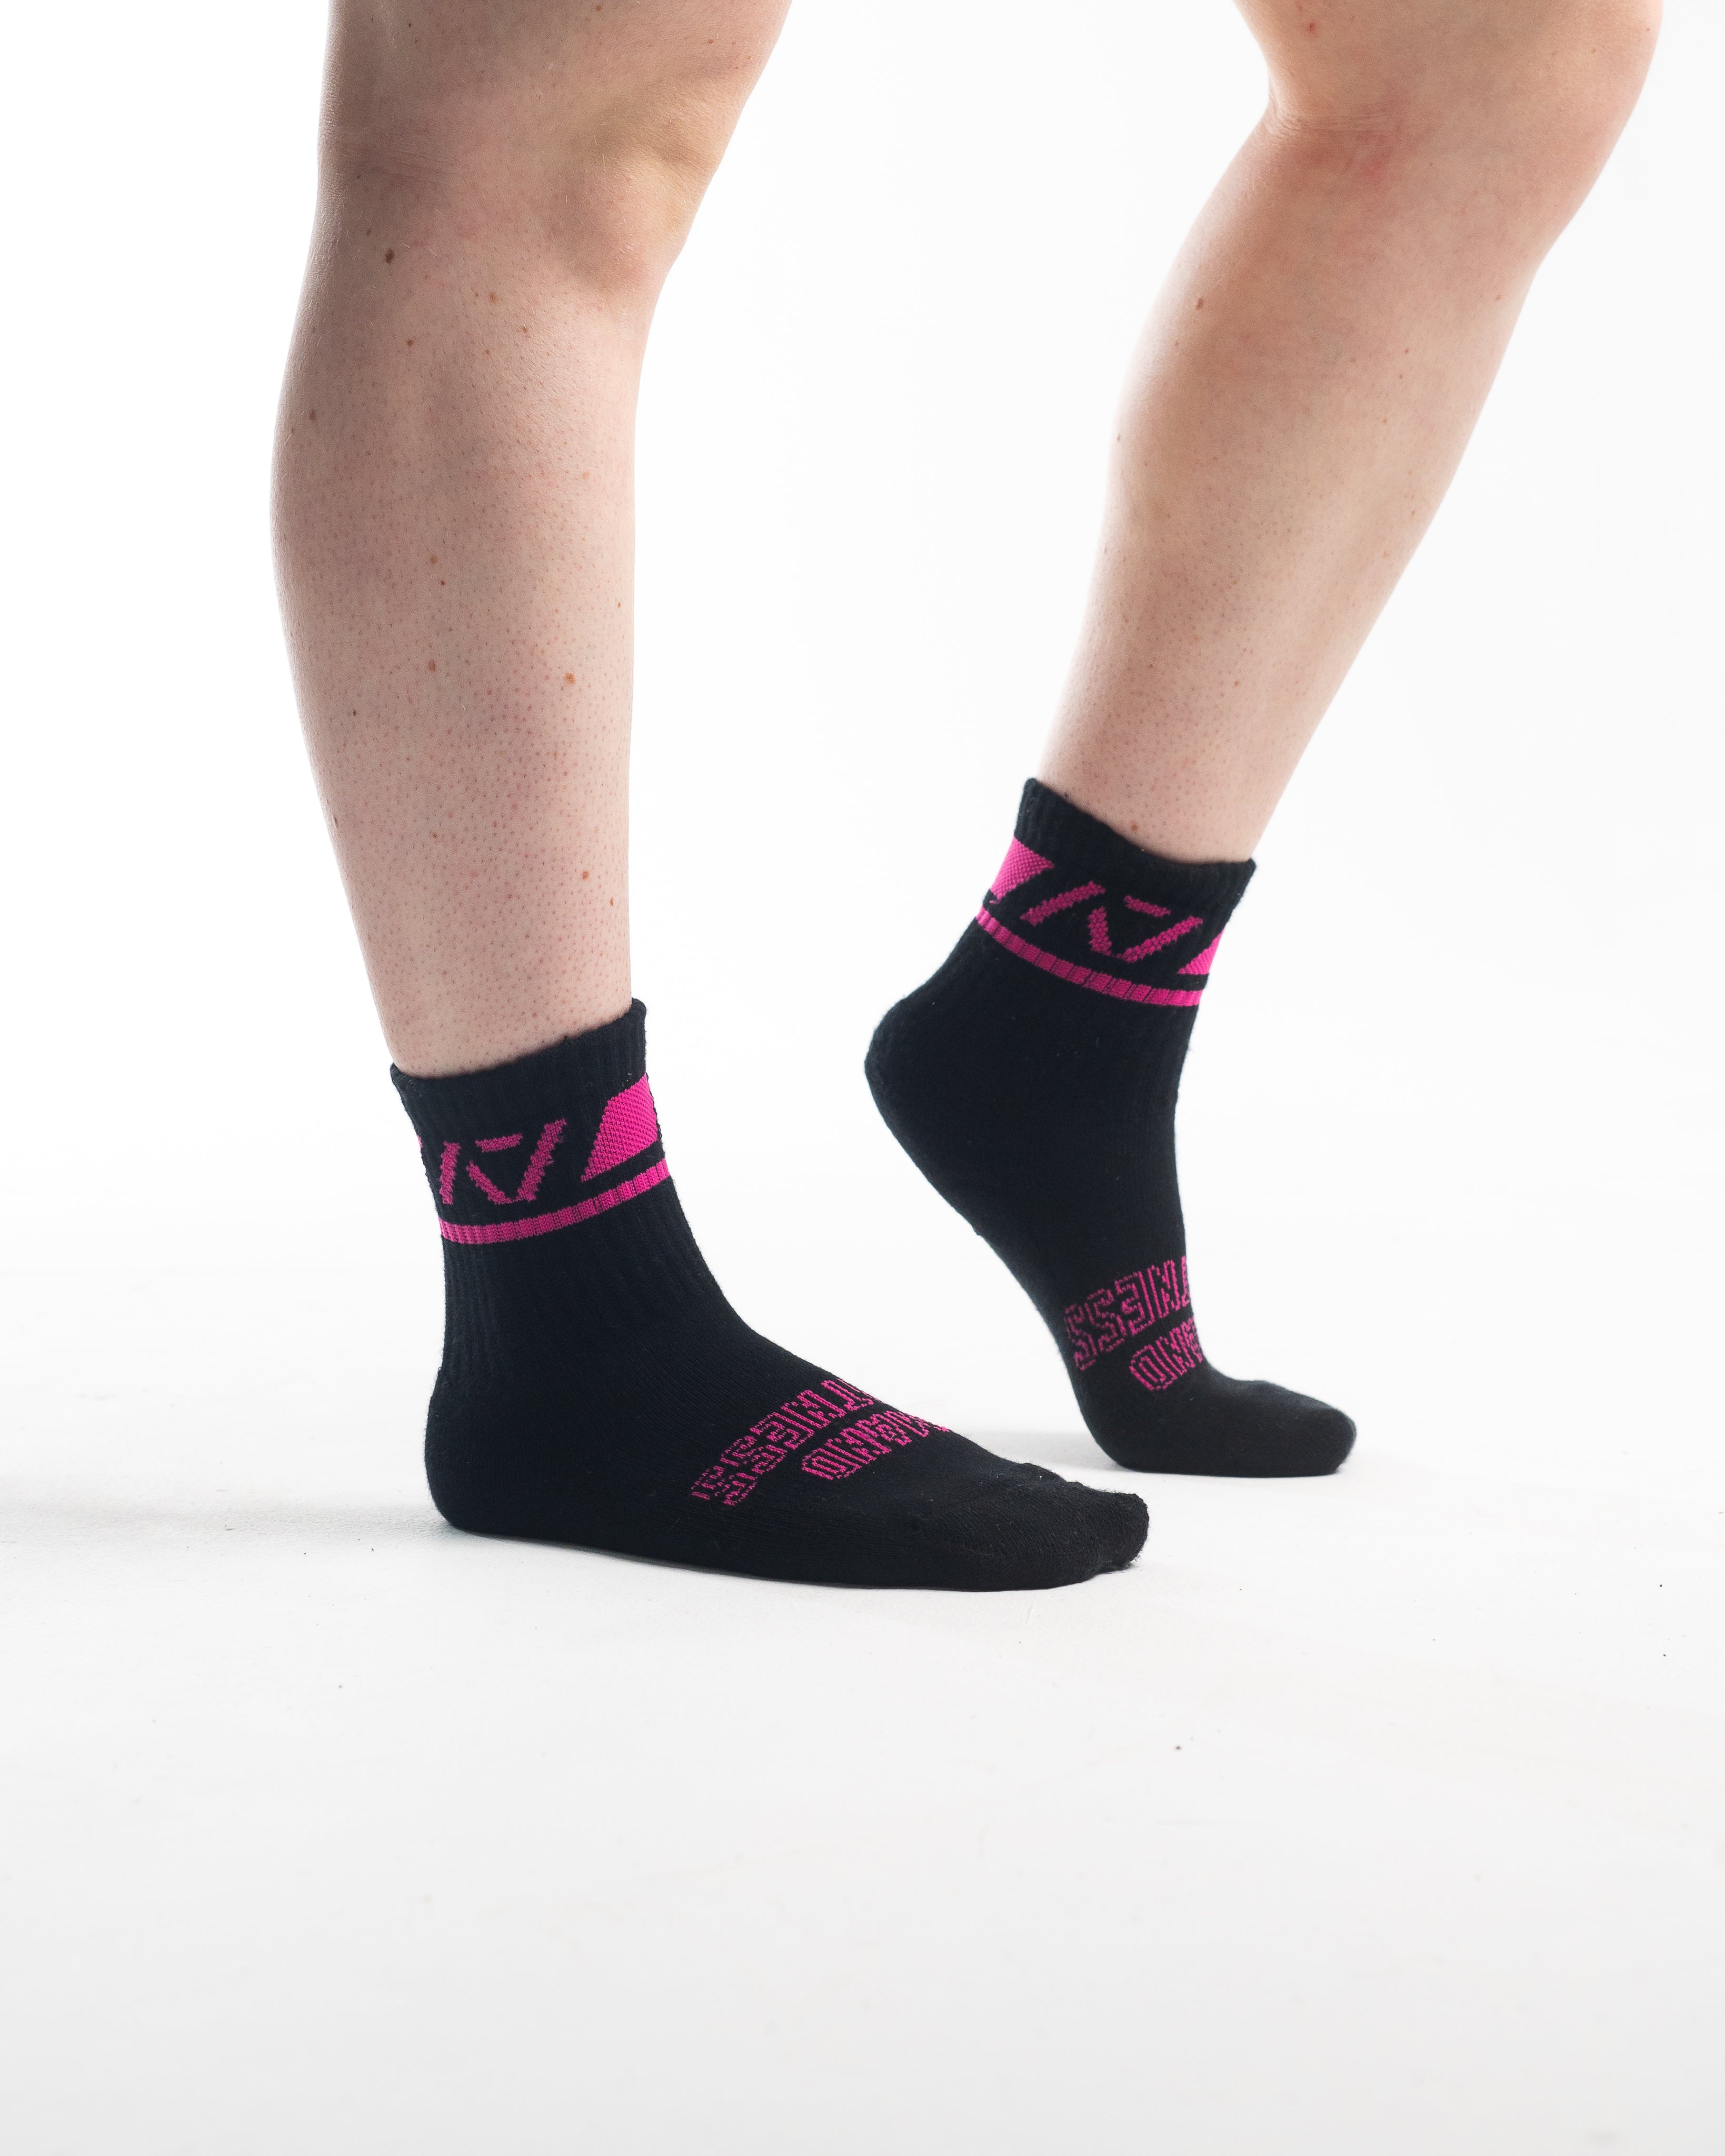 A7 Flamingo Crew socks showcase pink logos to let your energy show on the platform, in your training or while out and about. The IPF Approved Shadow Stone Meet Kit includes Powerlifting Singlet, A7 Meet Shirt, A7 Zebra Wrist Wraps, A7 Deadlift Socks, Hourglass Knee Sleeves (Stiff Knee Sleeves and Rigor Mortis Knee Sleeves). Genouillères powerlifting shipping to France, Spain, Ireland, Germany, Italy, Sweden and EU. 